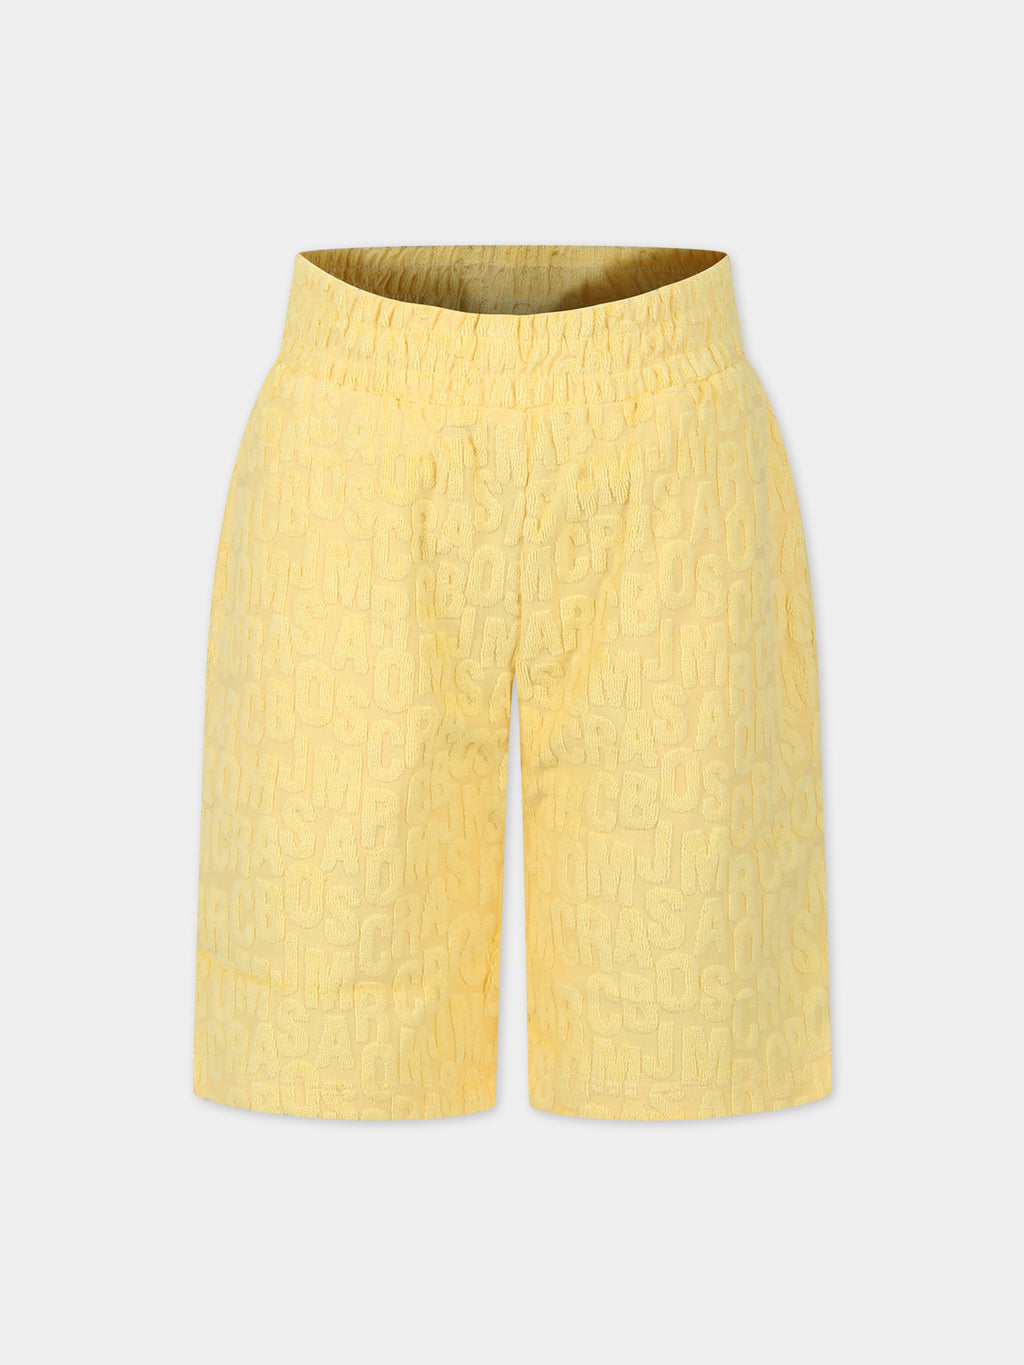 Yellow shorts for kids with logo